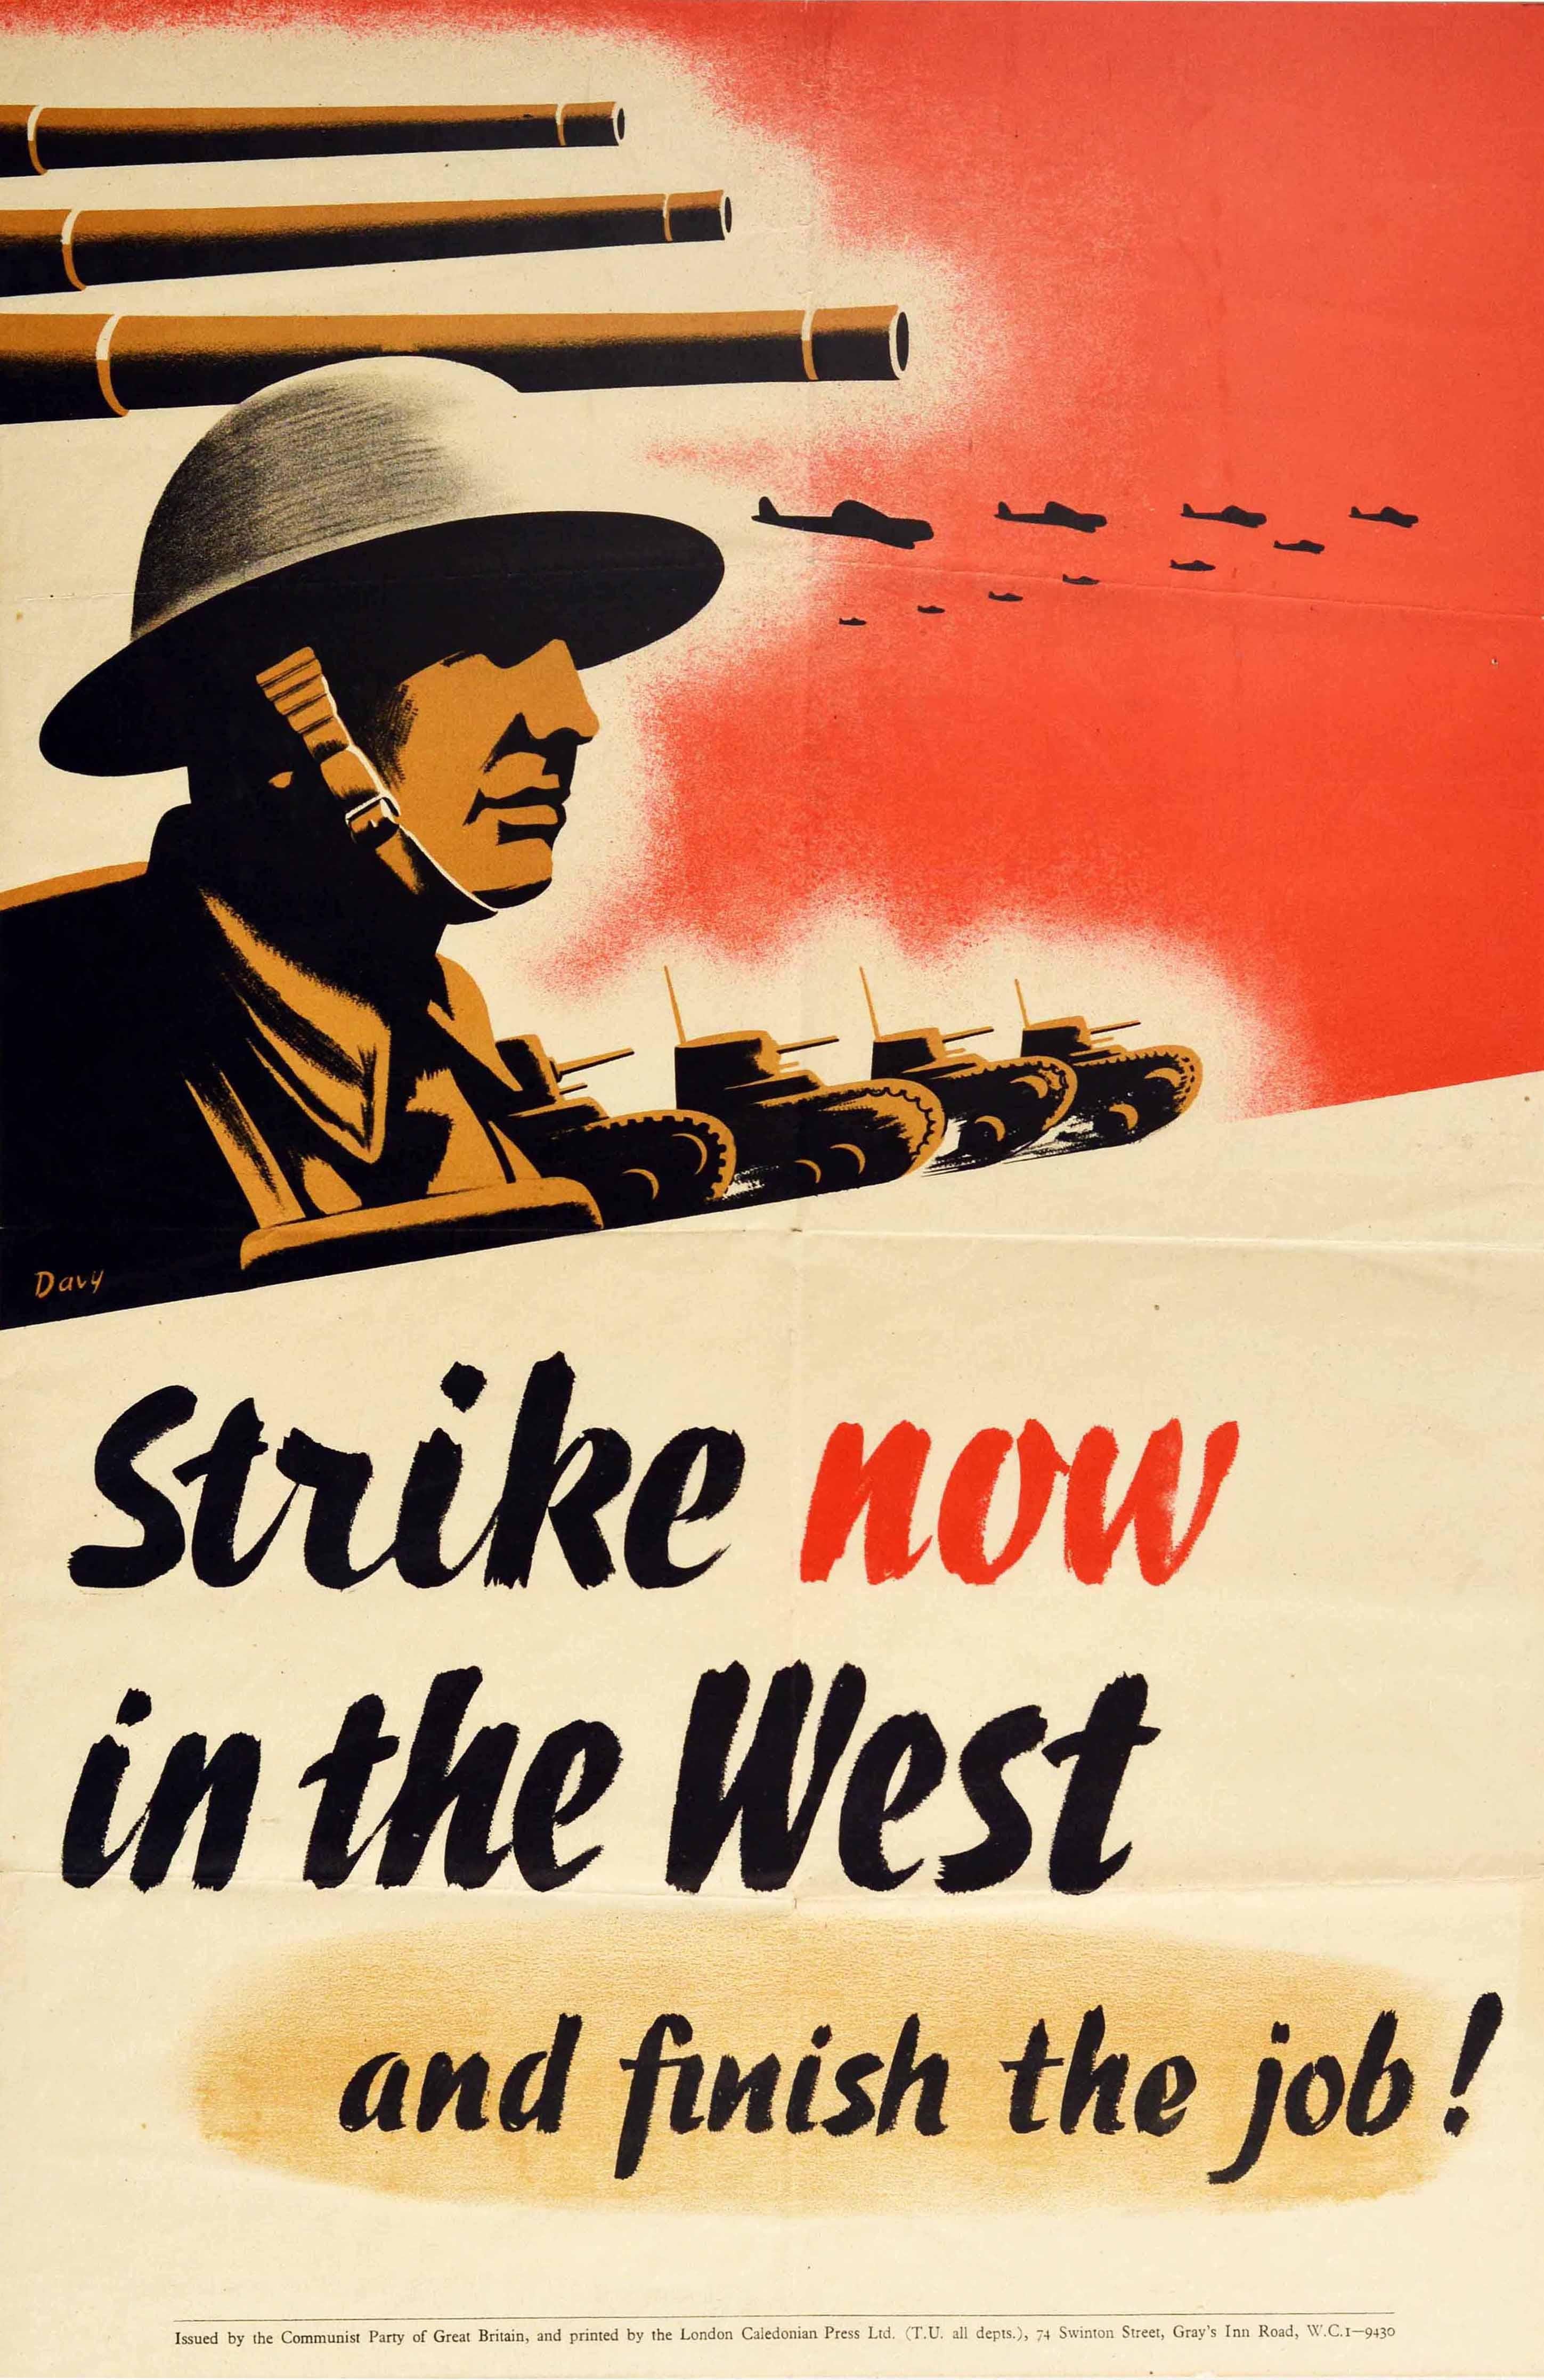 Original vintage World War Two political propaganda poster issued by the Communist Party of Great Britain - Strike now in the West and finish the job! Dynamic design features a soldier in a uniform and helmet, tanks rolling forward, planes and gun